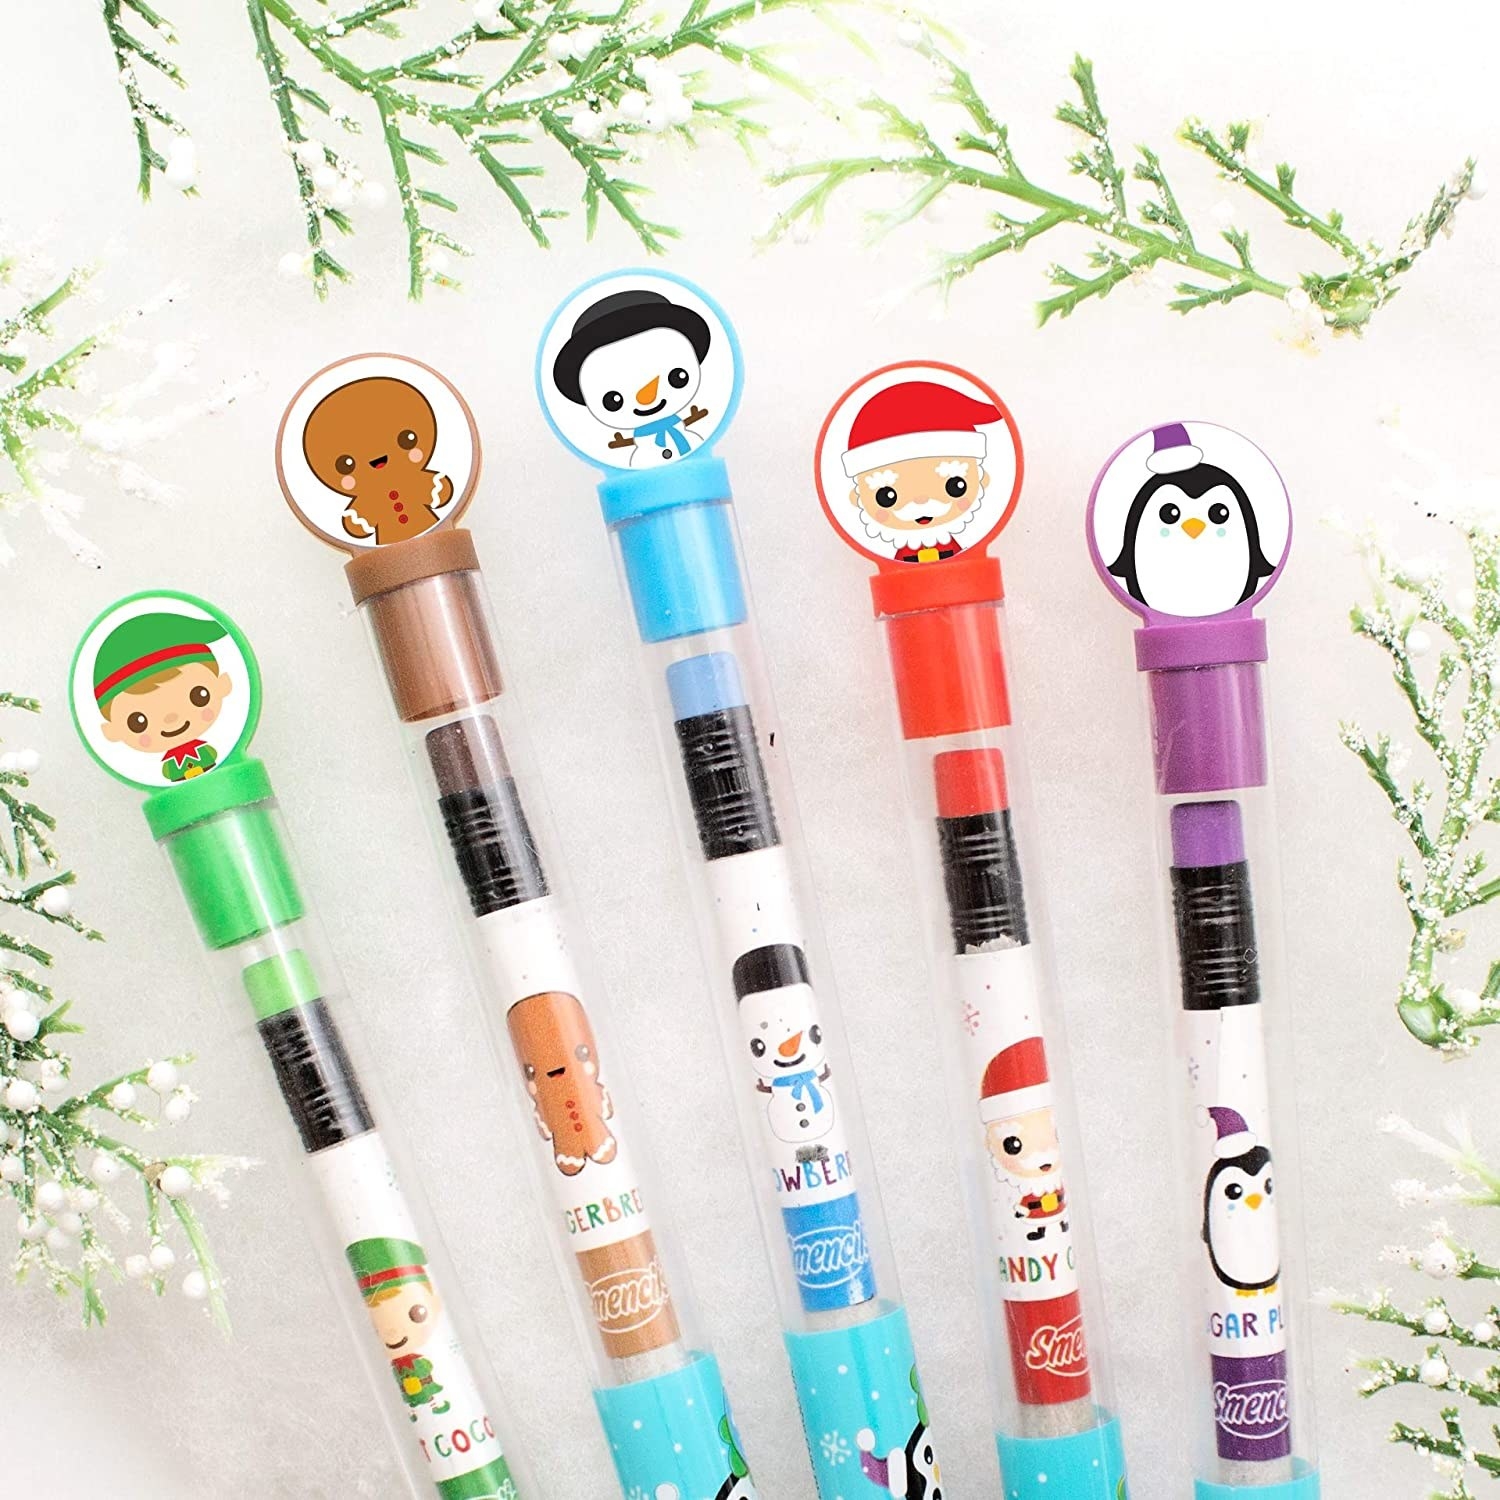 The pencils in Christmas character themes